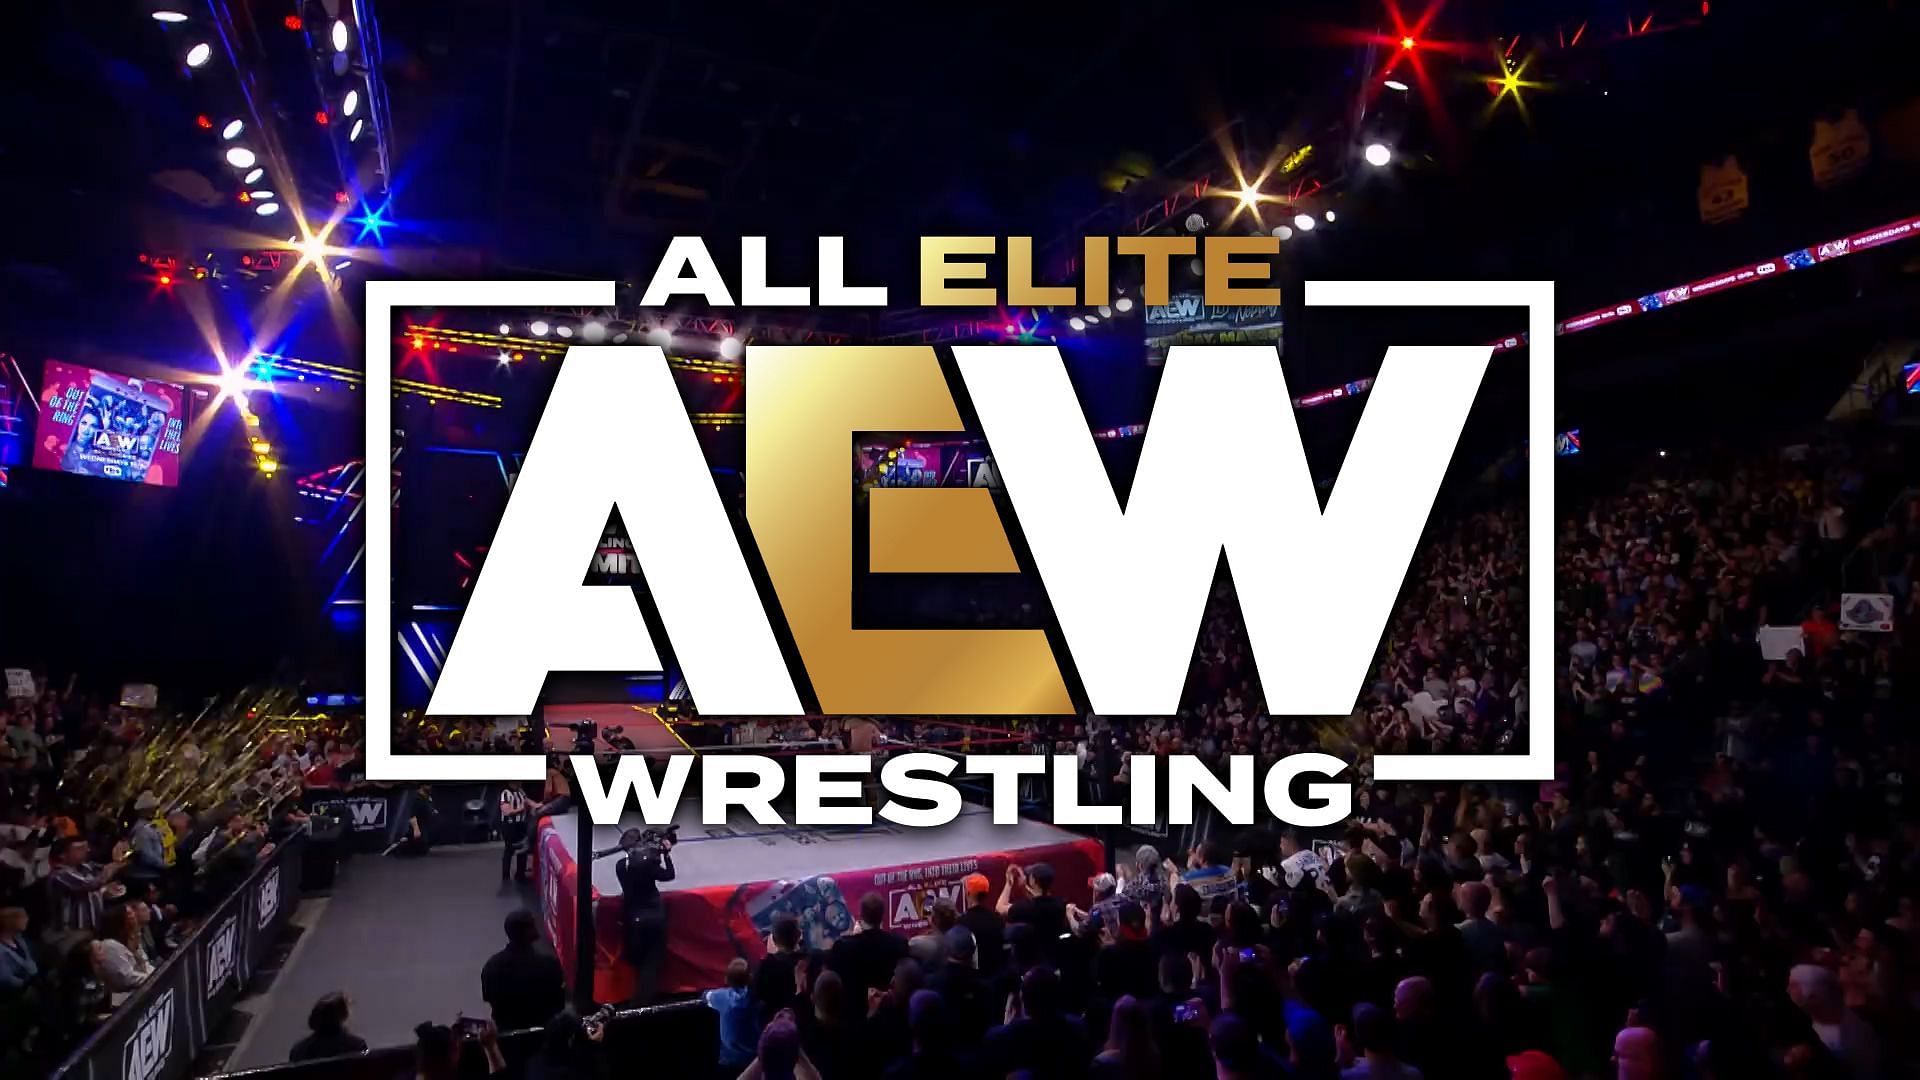 AEW is undergoing a dramatic shift in leadership